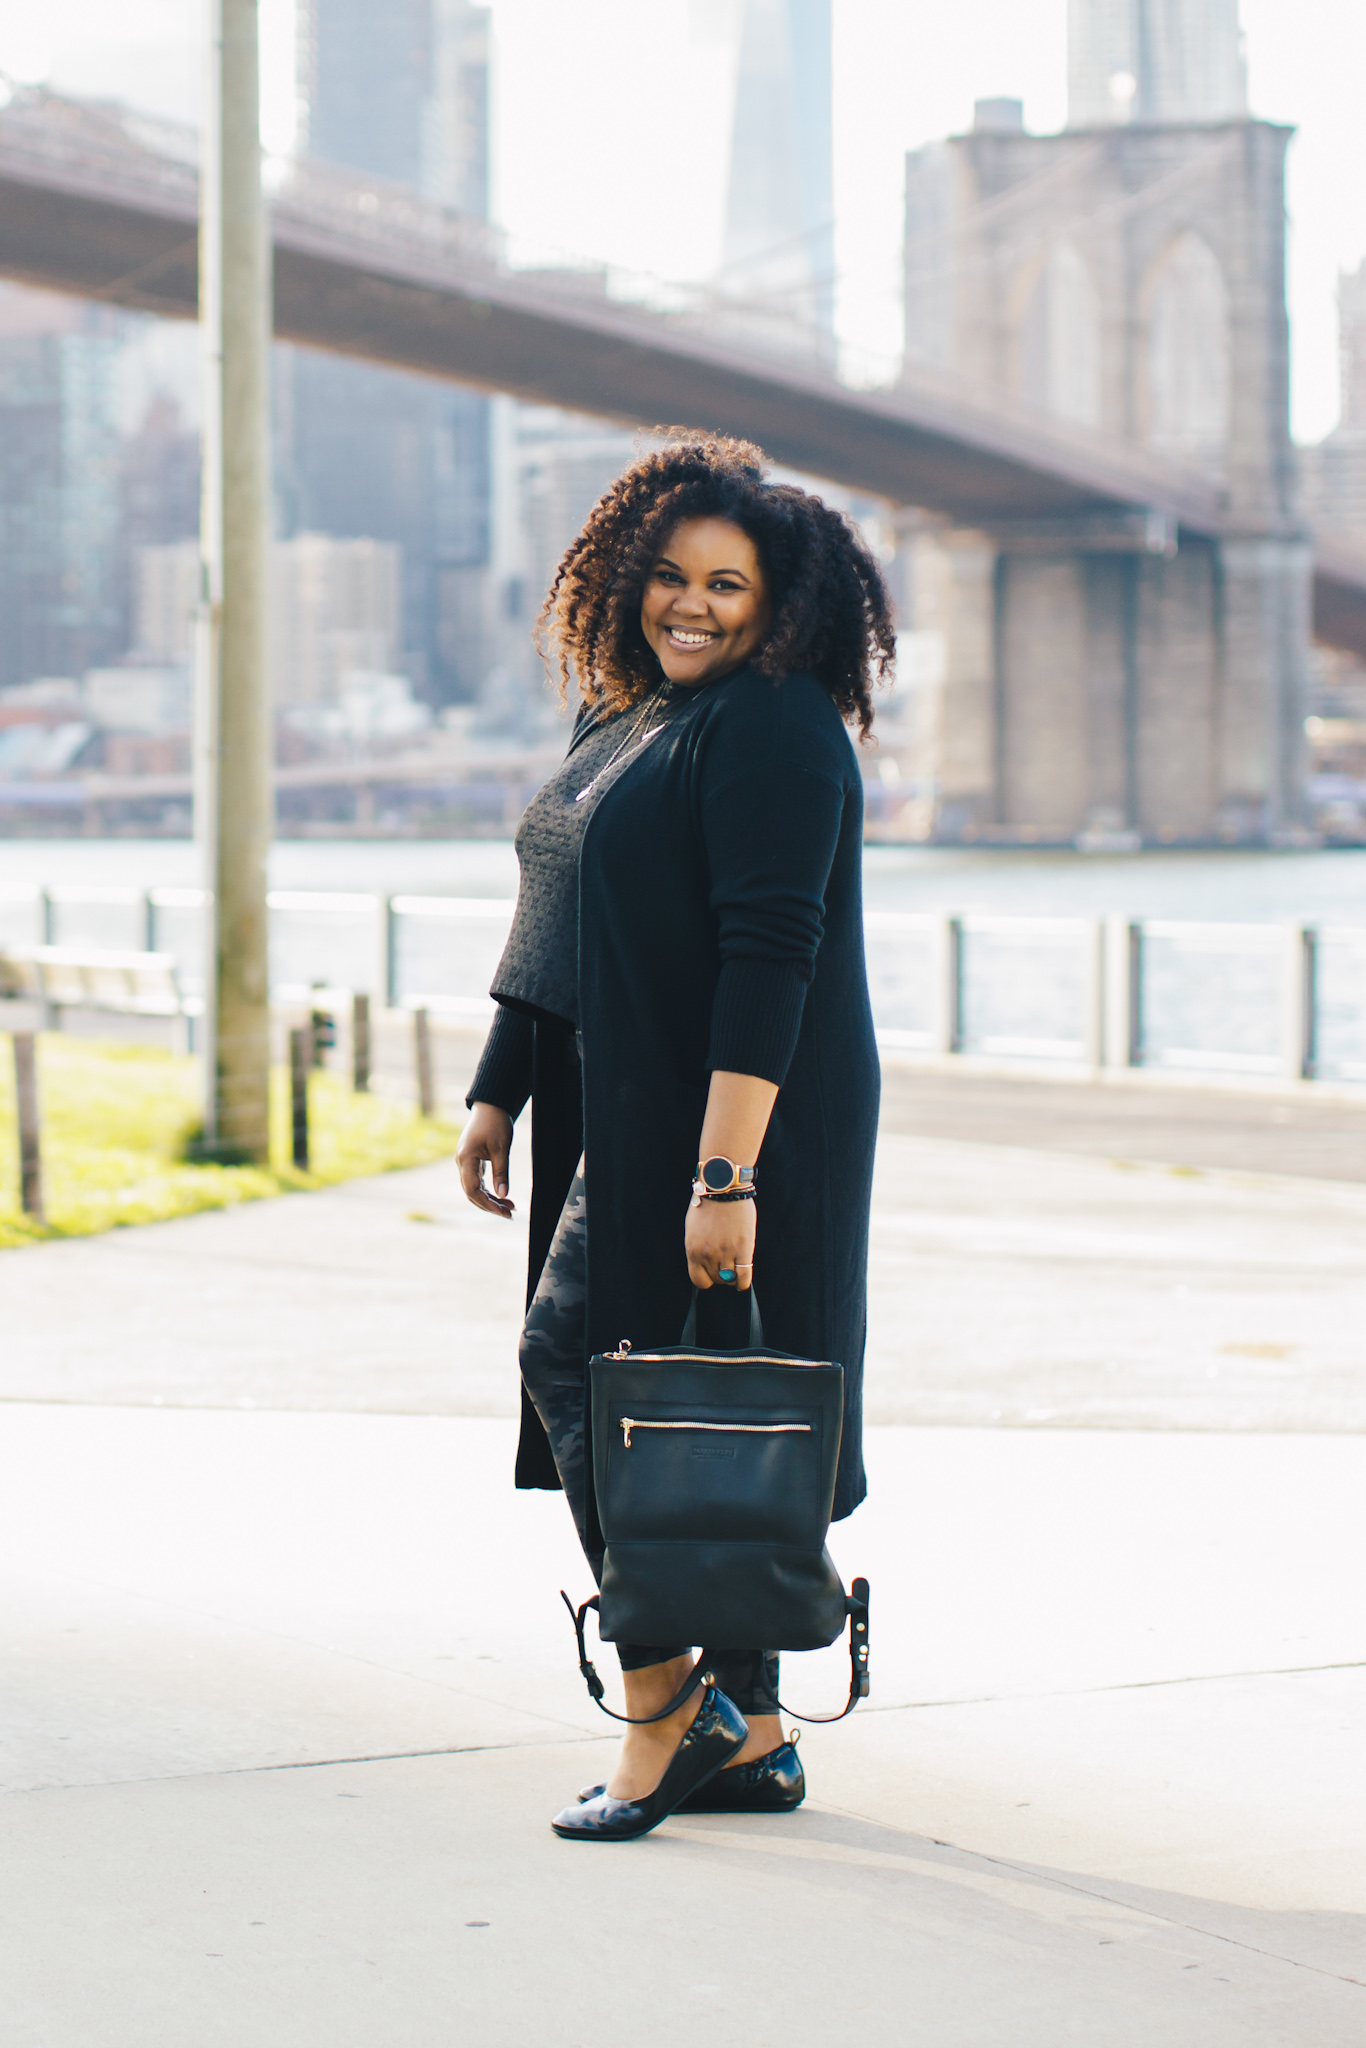 black woman wears long black cardigan holding a black leather backpack